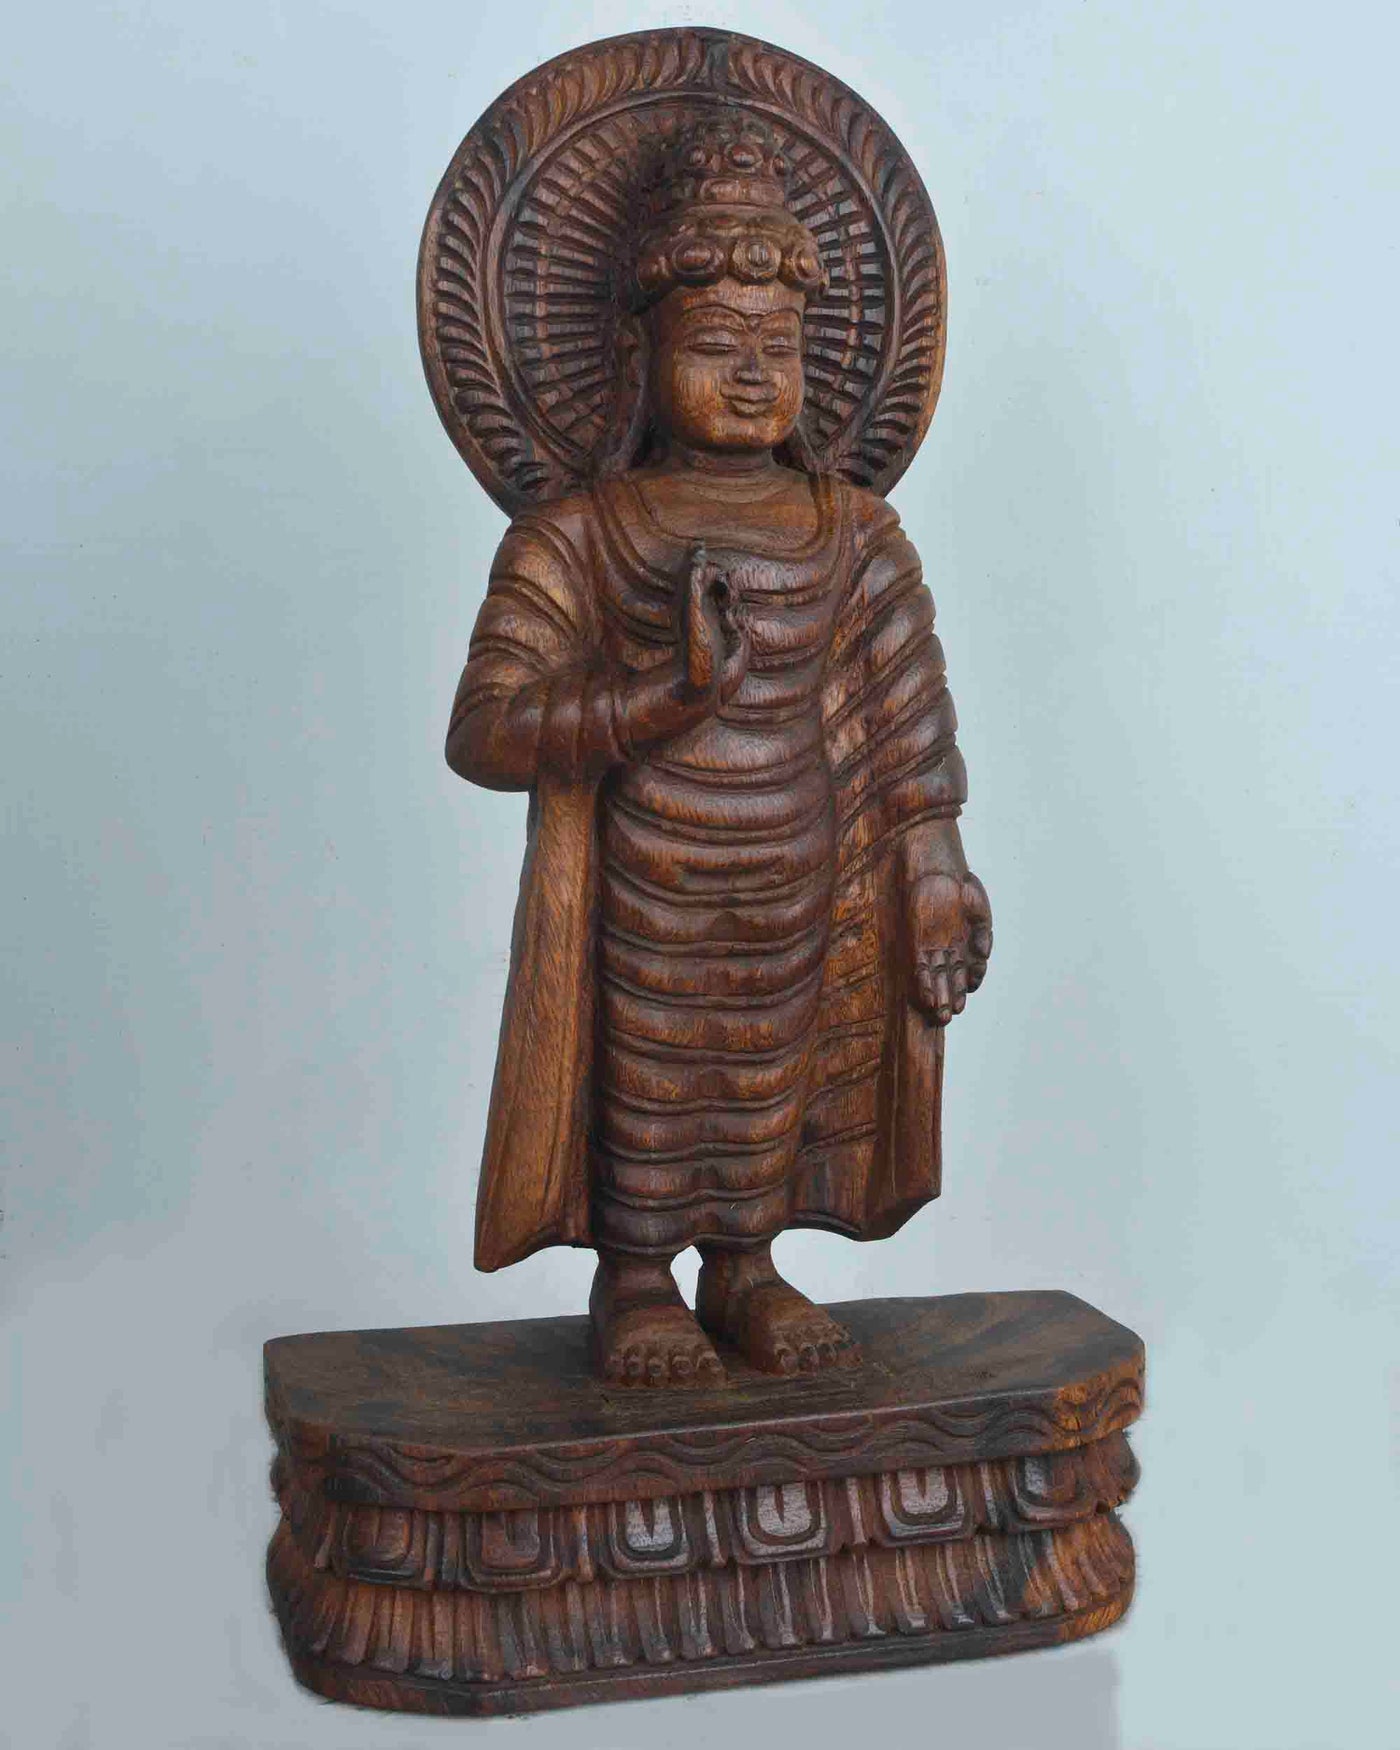 Tiny Buddha Blessing people in vitarka mutra statue 18"